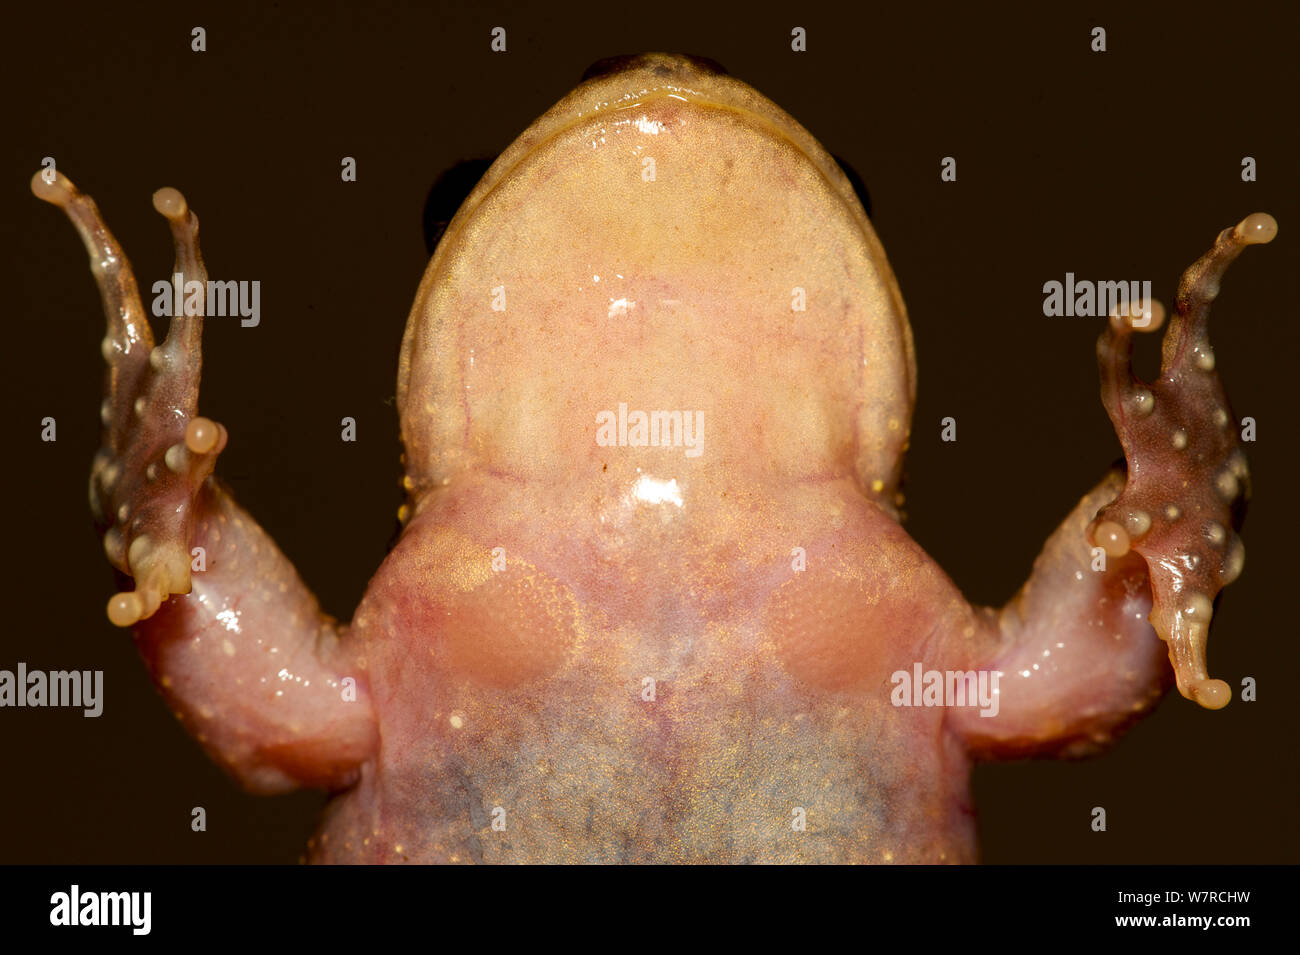 Ventral view of a male Spiney-chested Frog (Alsodes hugoi) showing gland clusters, Chile, January, Controlled conditions Stock Photo